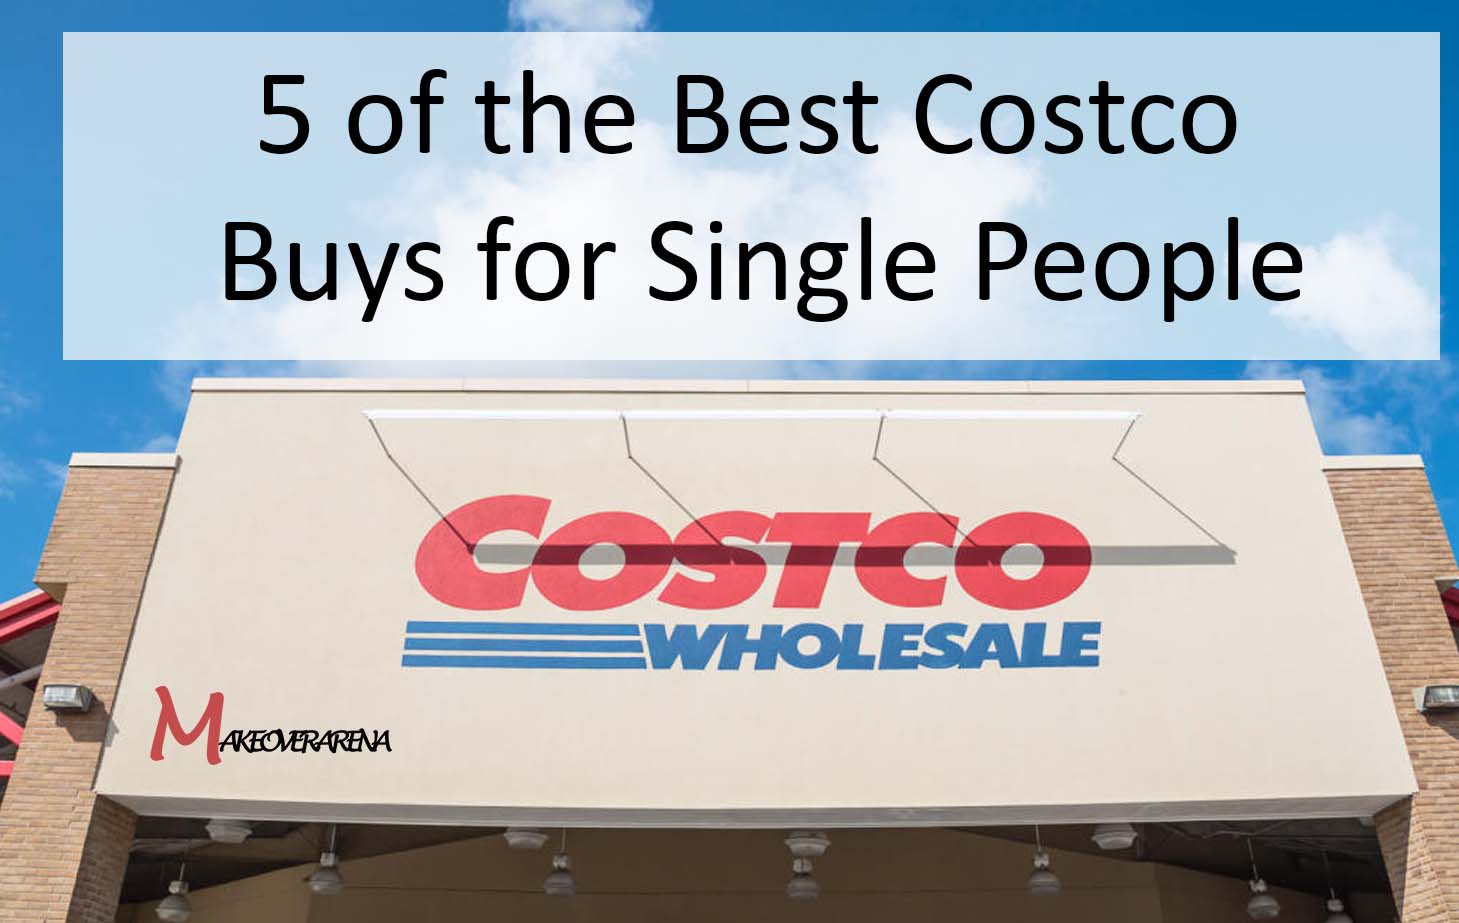 5 of the Best Costco Buys for Single People